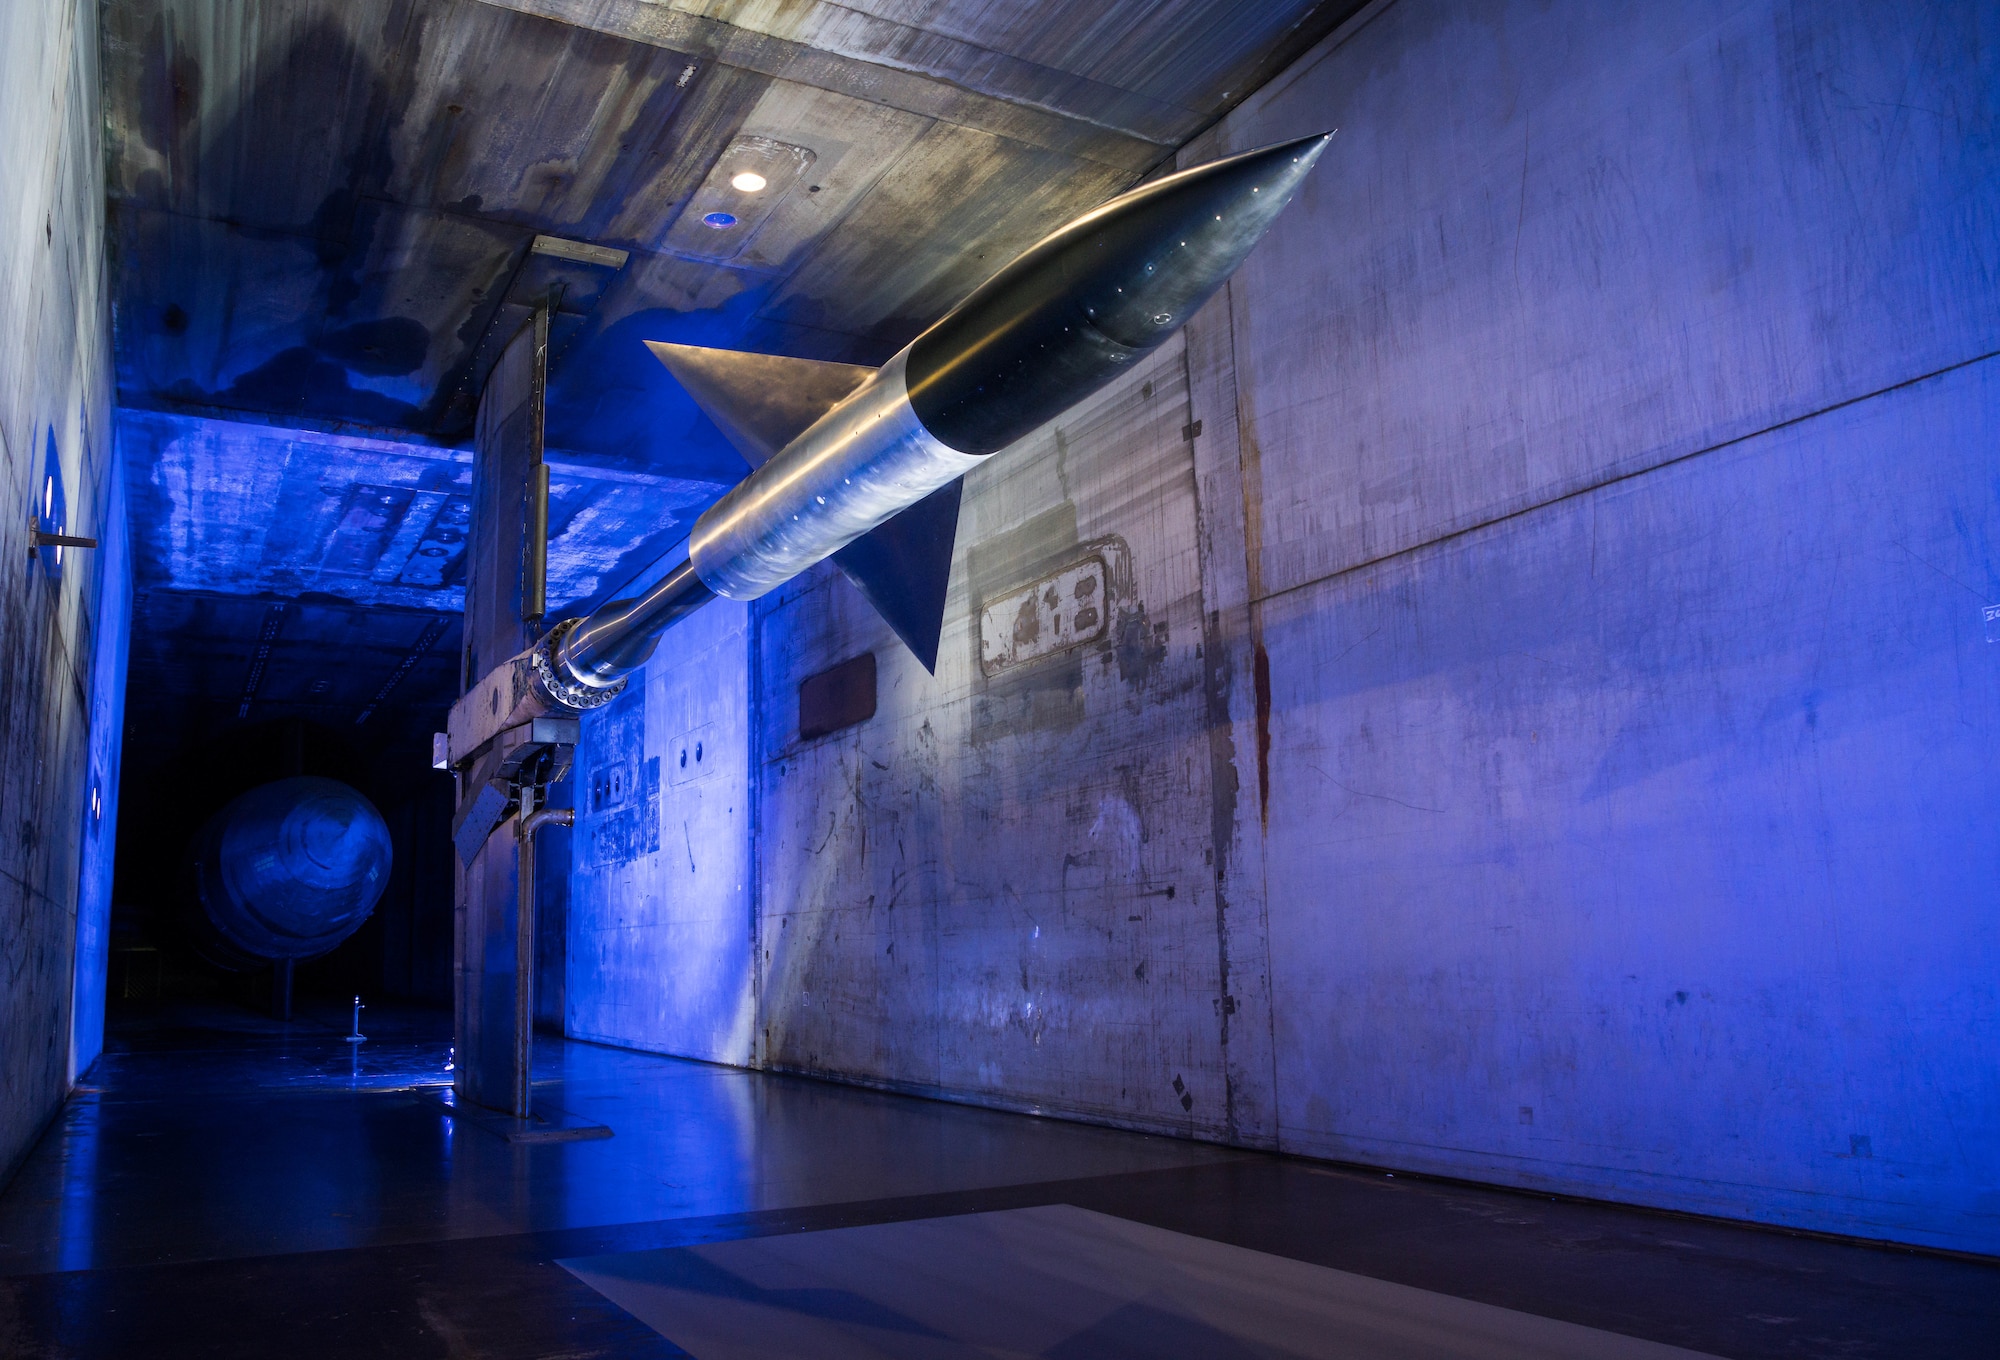 An AGARD-B model is seen here mounted on a sting in the 16-foot supersonic wind tunnel at Arnold Air Force Base, Tenn., Jan. 18, 2021. A test run with the AGARD-B model was the culmination of a multi-year effort to return Tunnel 16S to service. (U.S. Air Force photo by Jill Pickett)